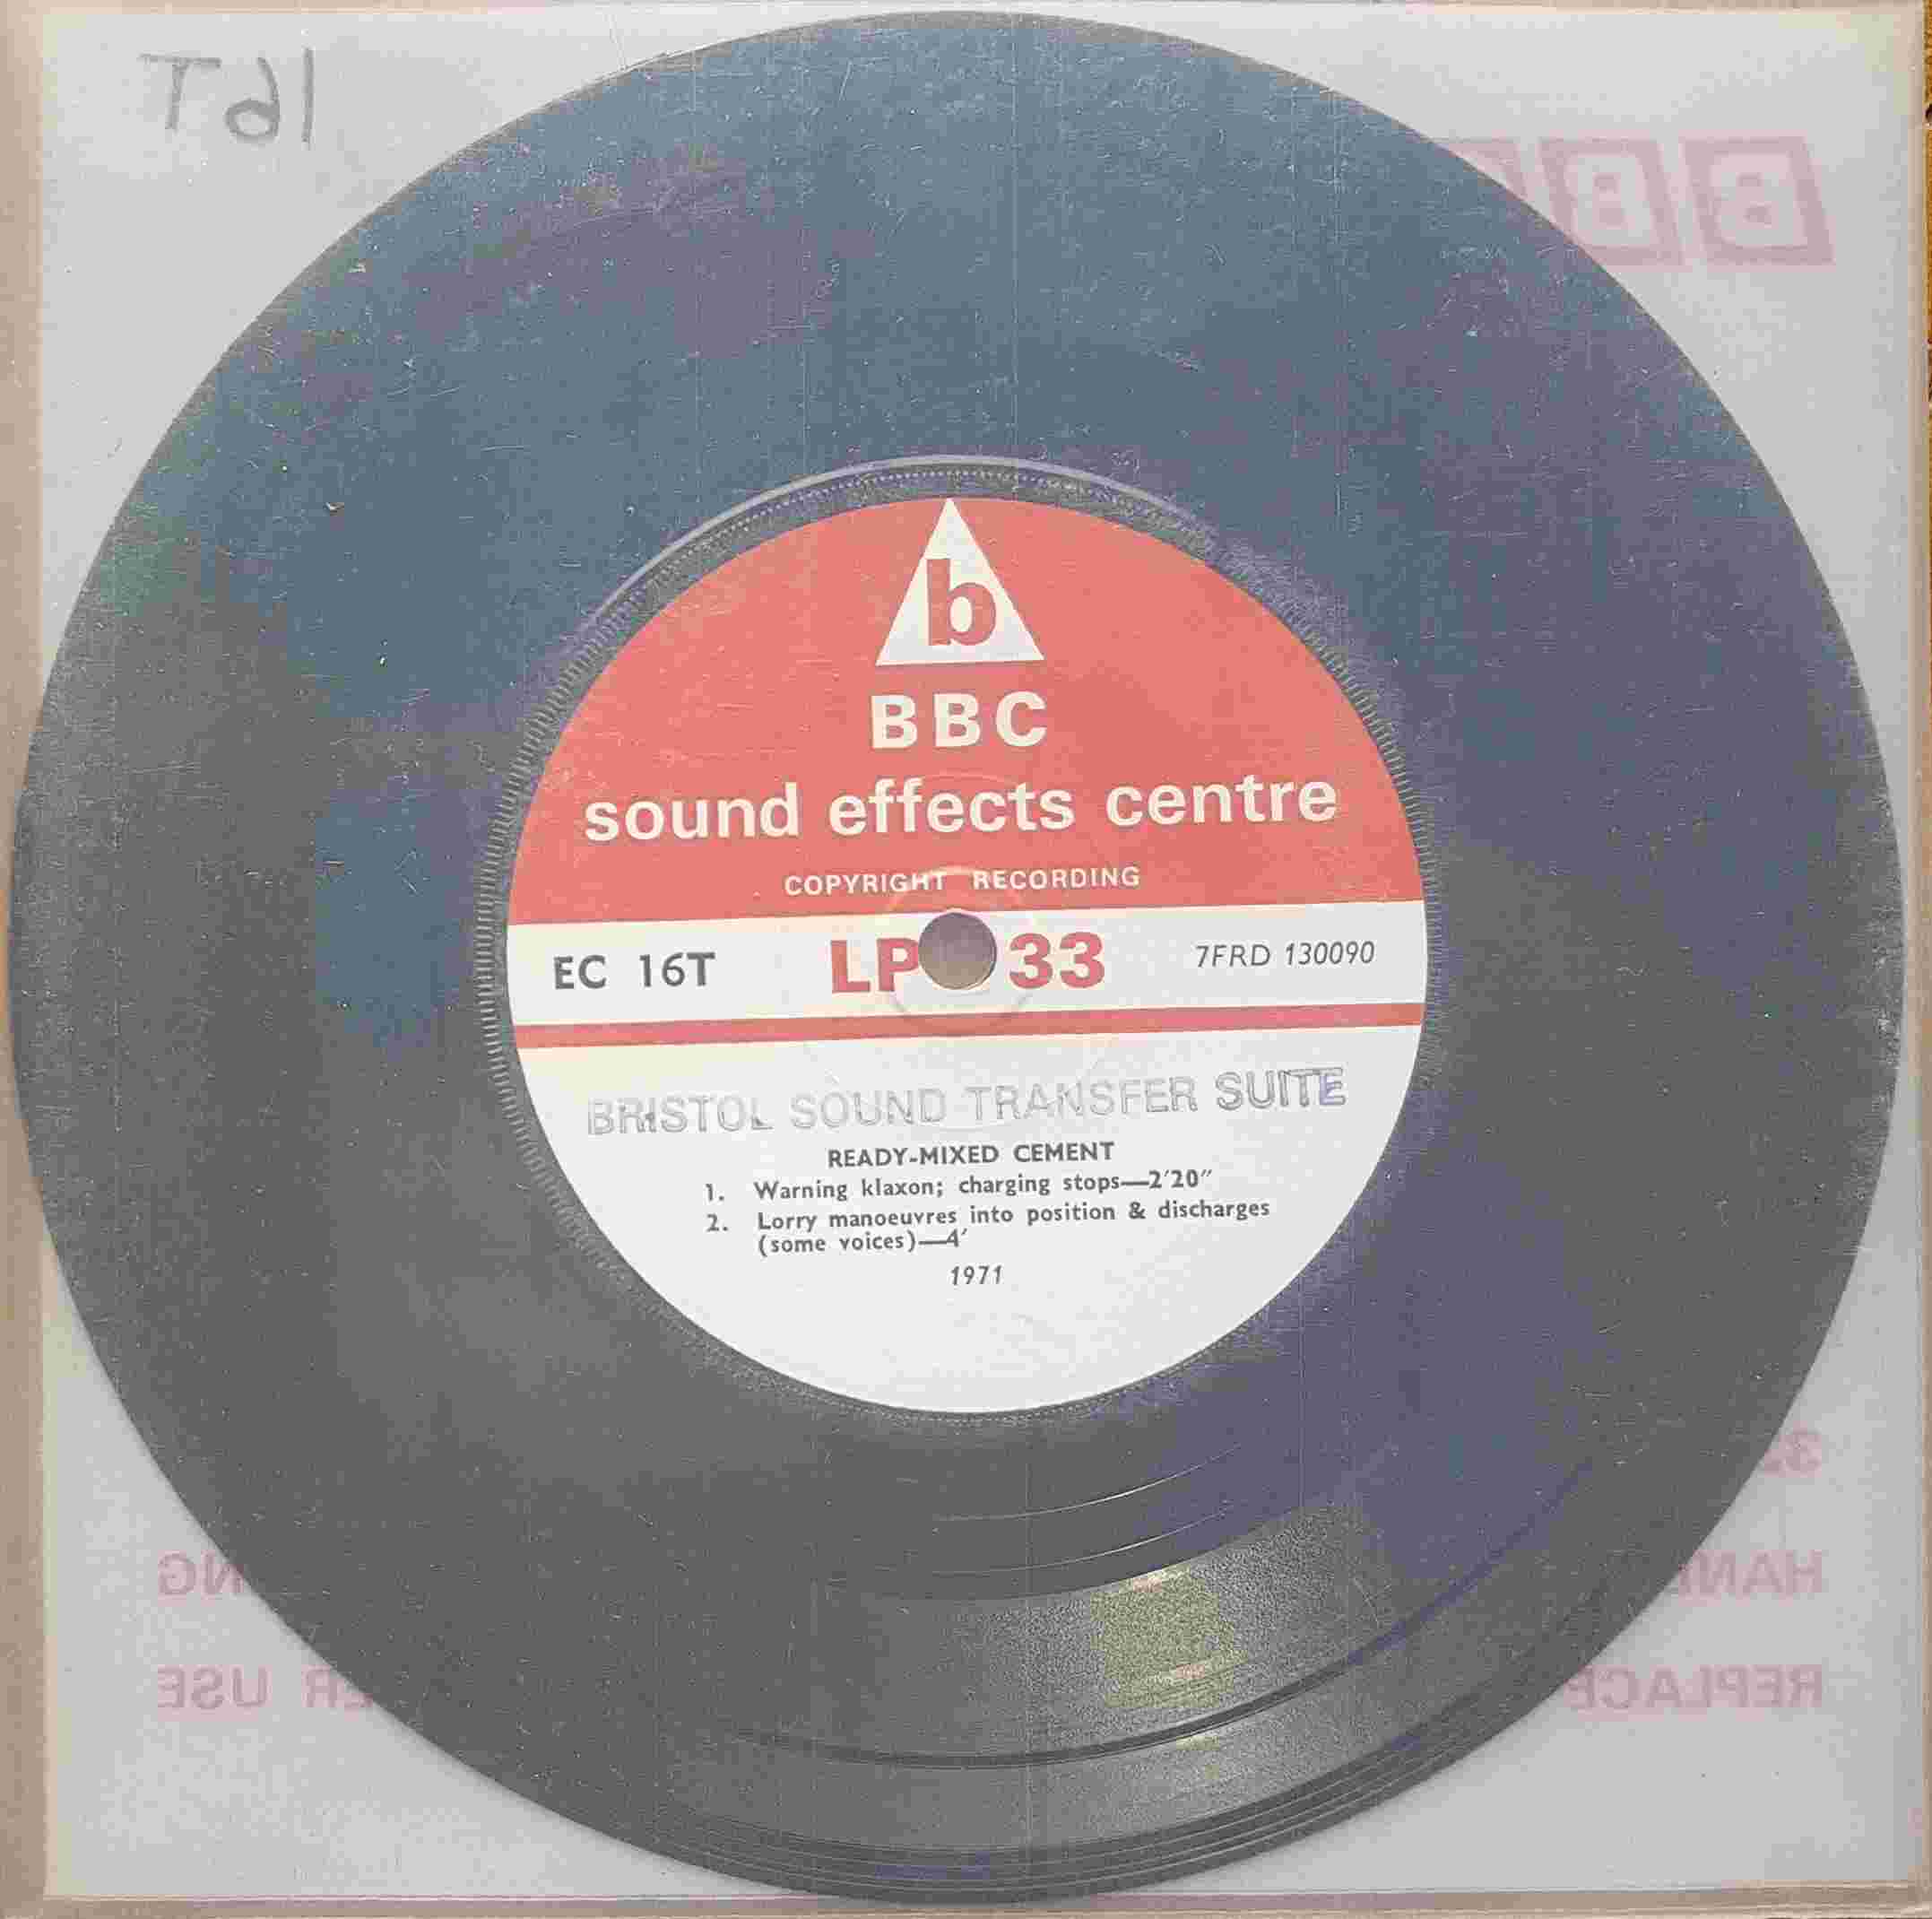 Picture of EC 16T Ready-mixed cement by artist Not registered from the BBC records and Tapes library